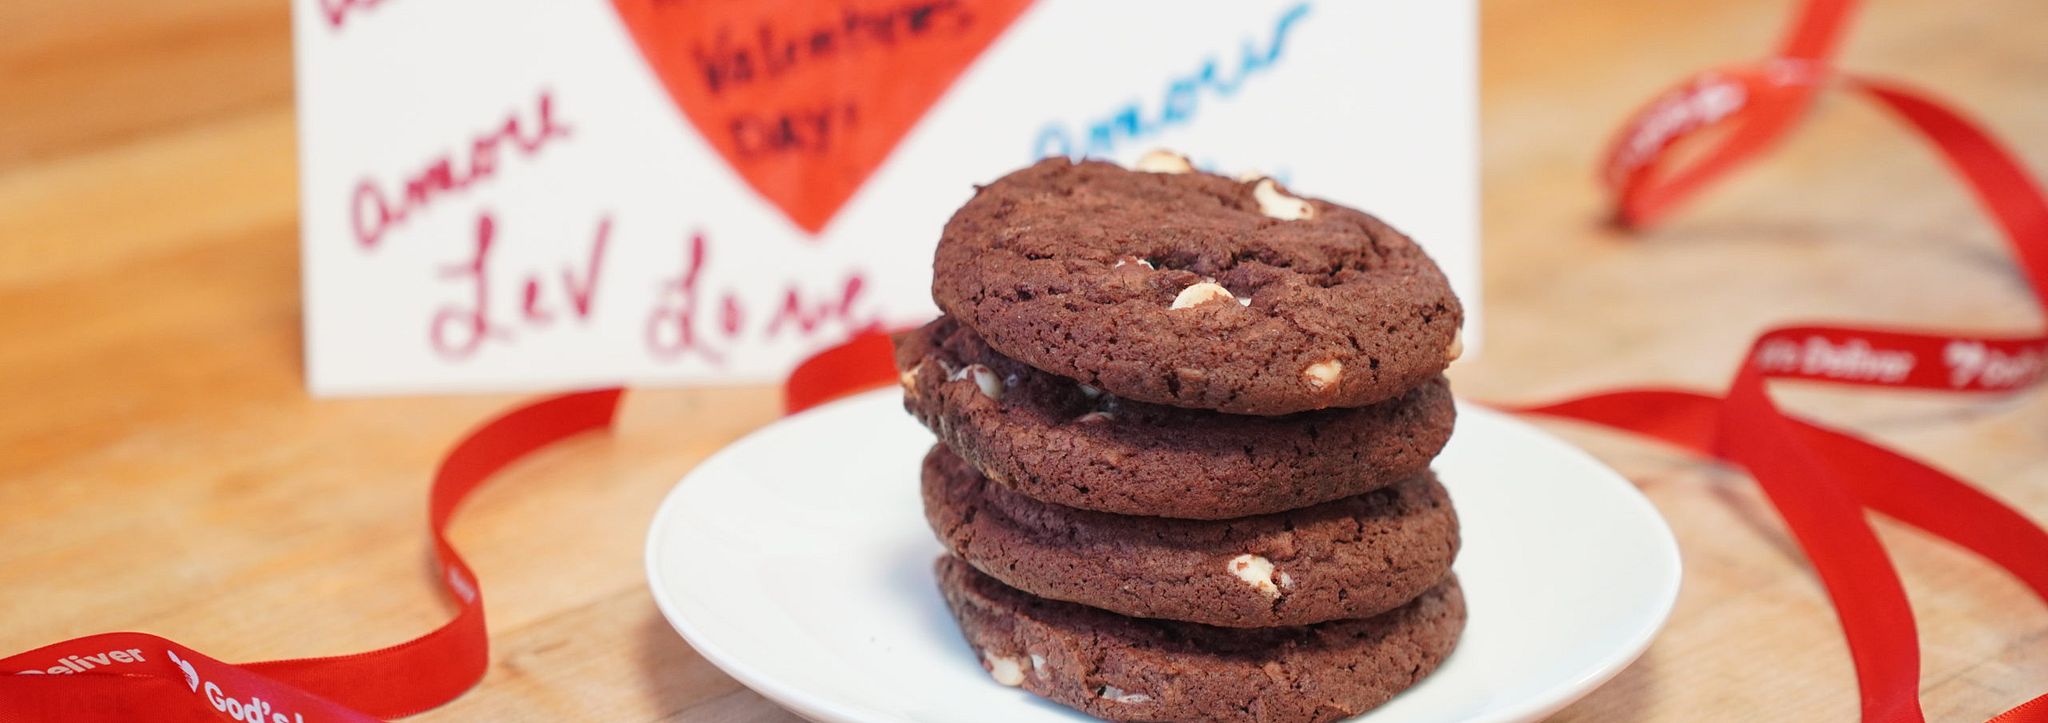 A photo of red velvet cookies stacked on a white plate. In the background there is a Valentine's Day card.